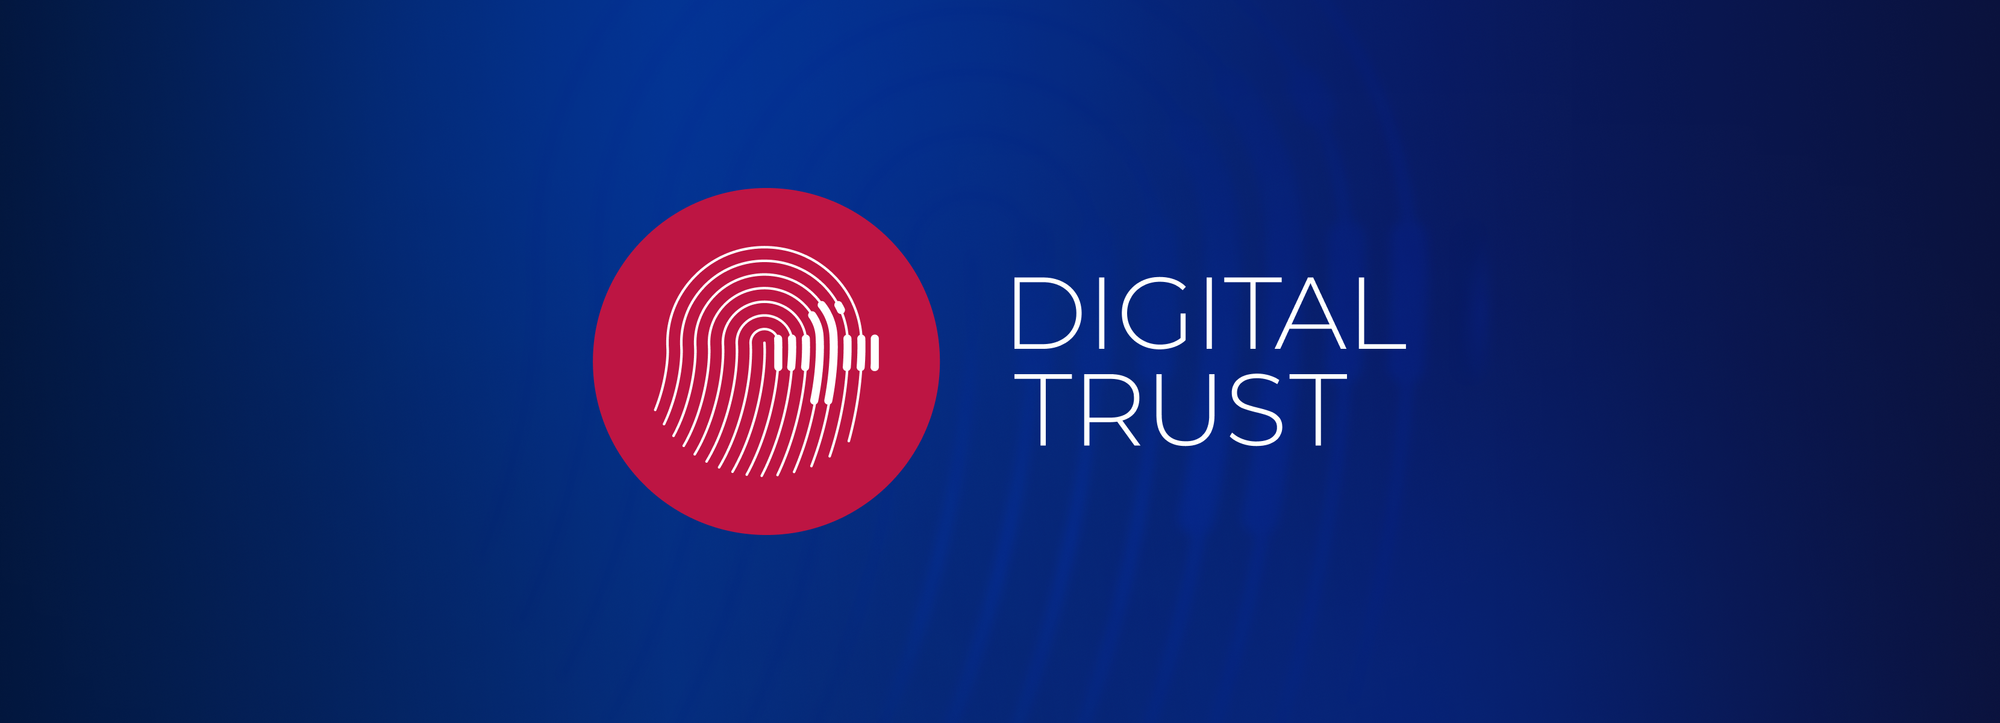 Trust issues: Building digital trust in the age of skepticism